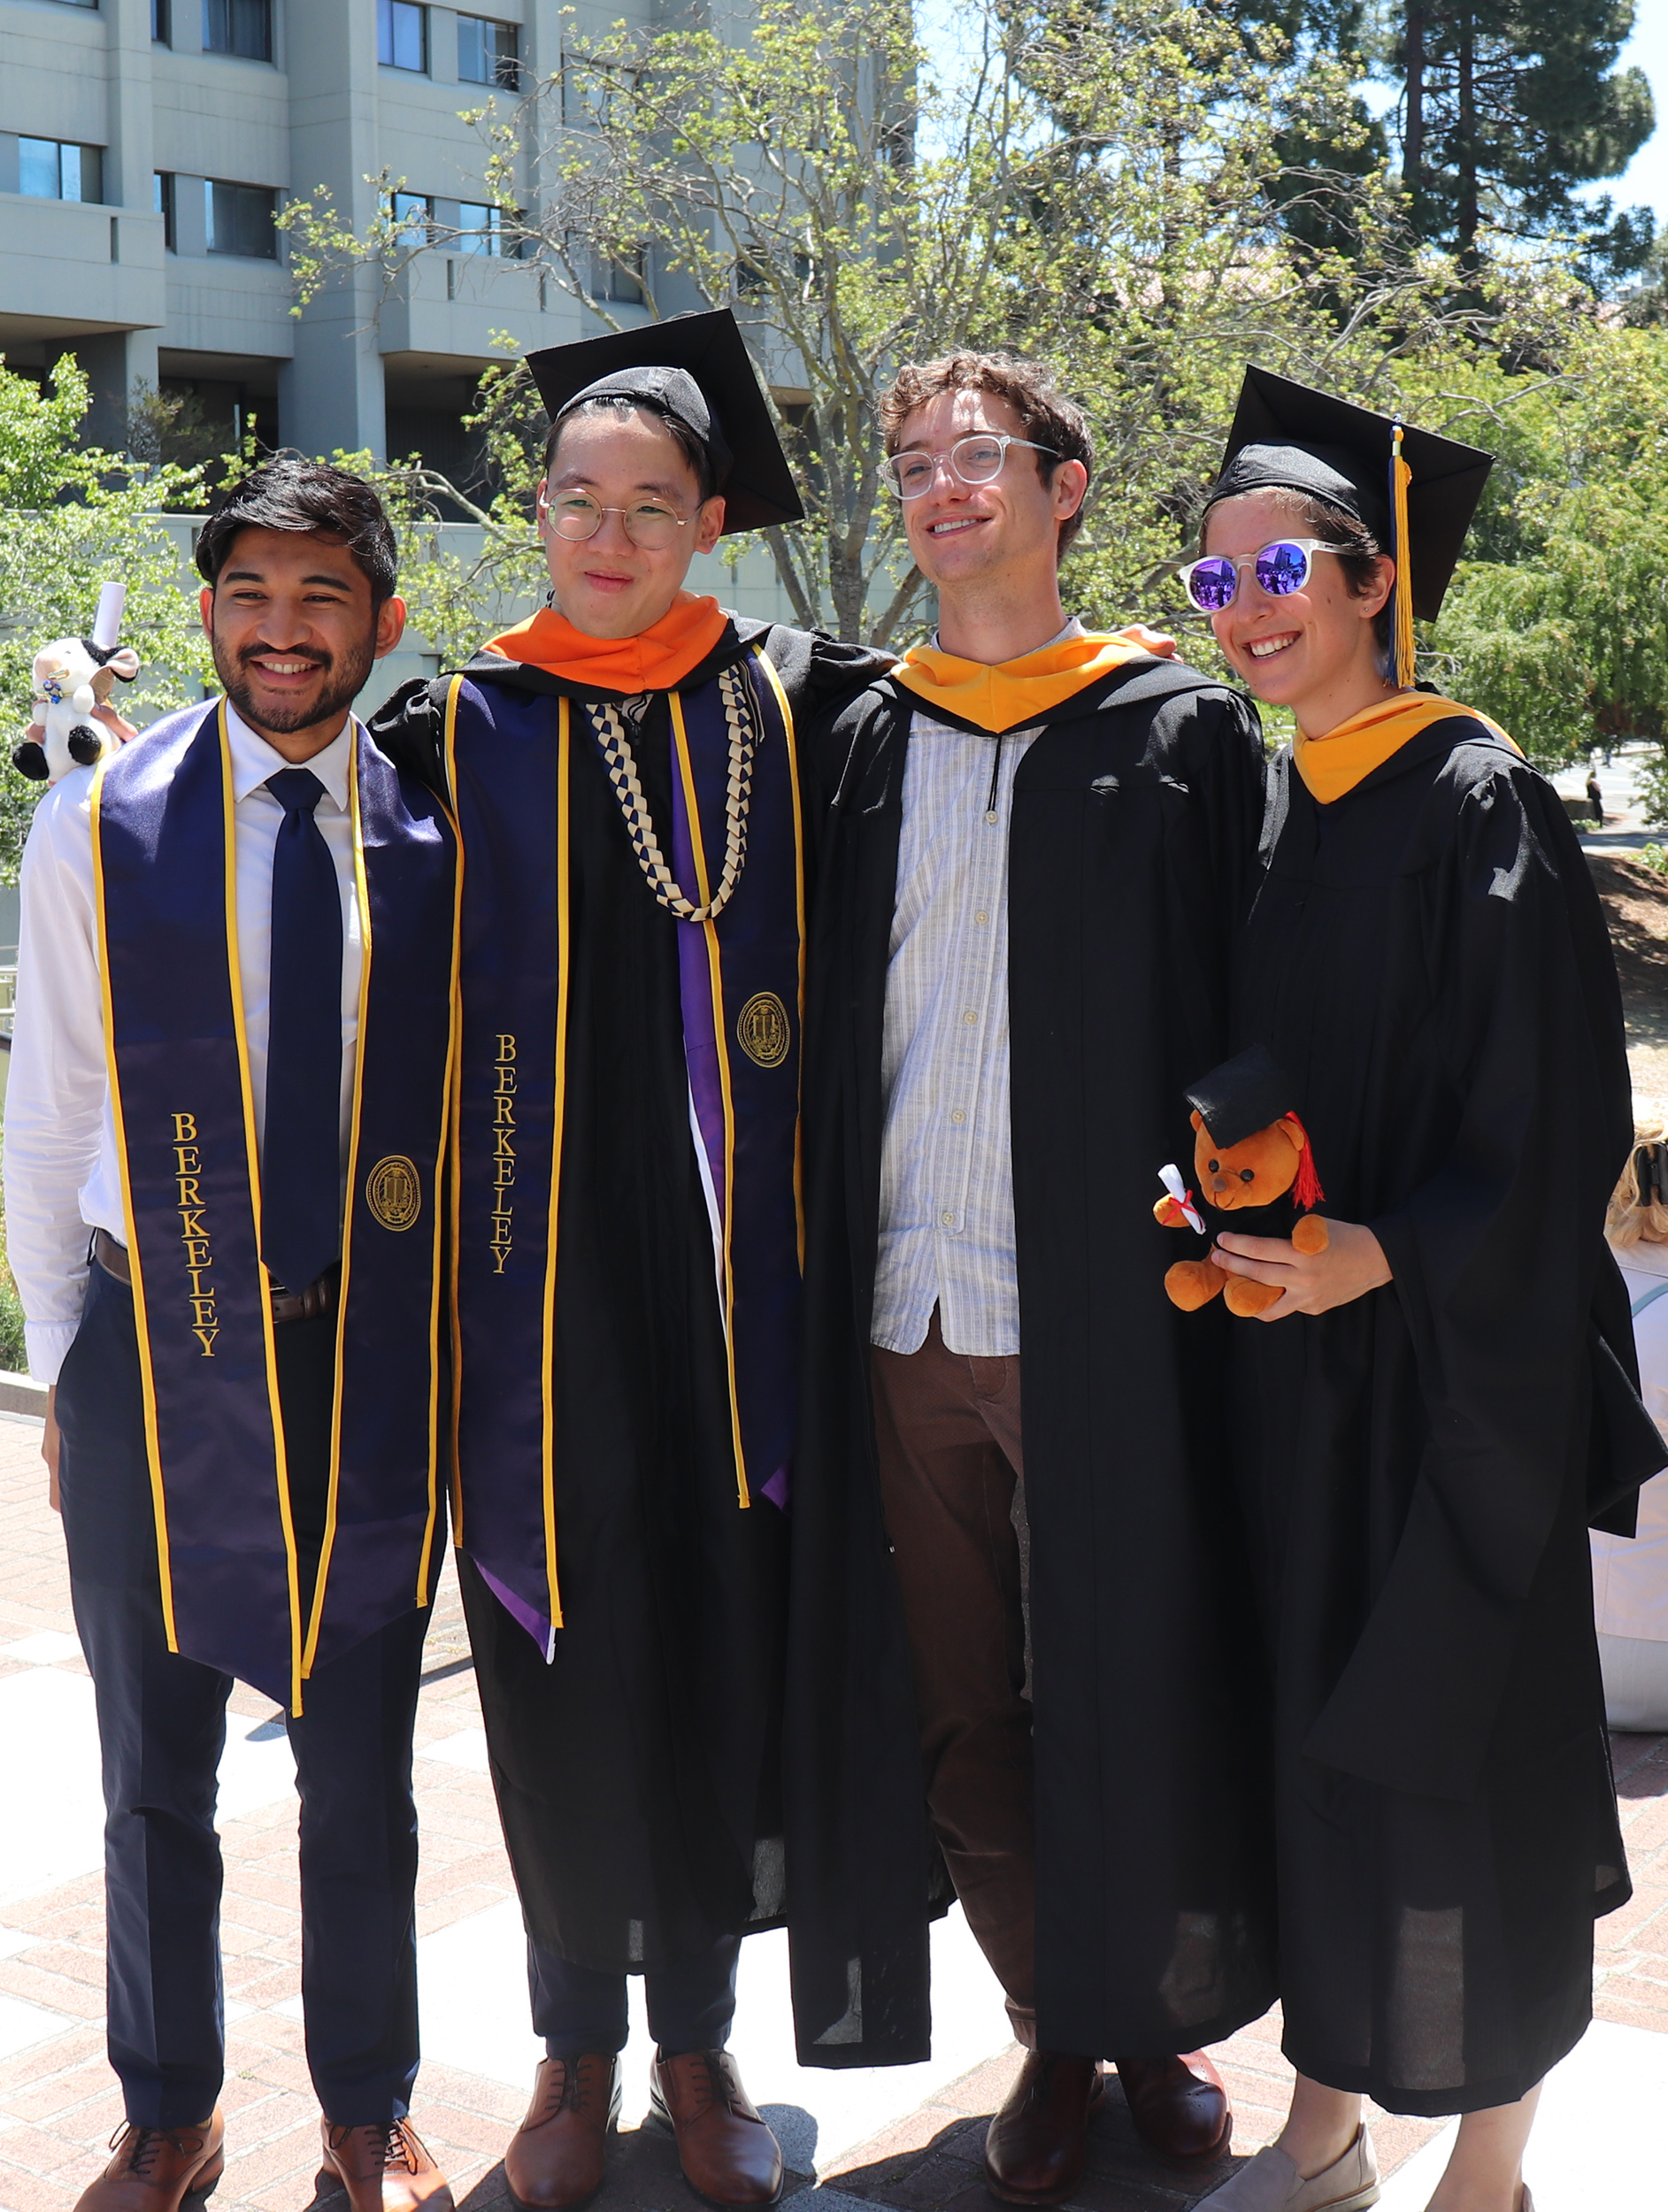 Newly minted Masters students celebrate